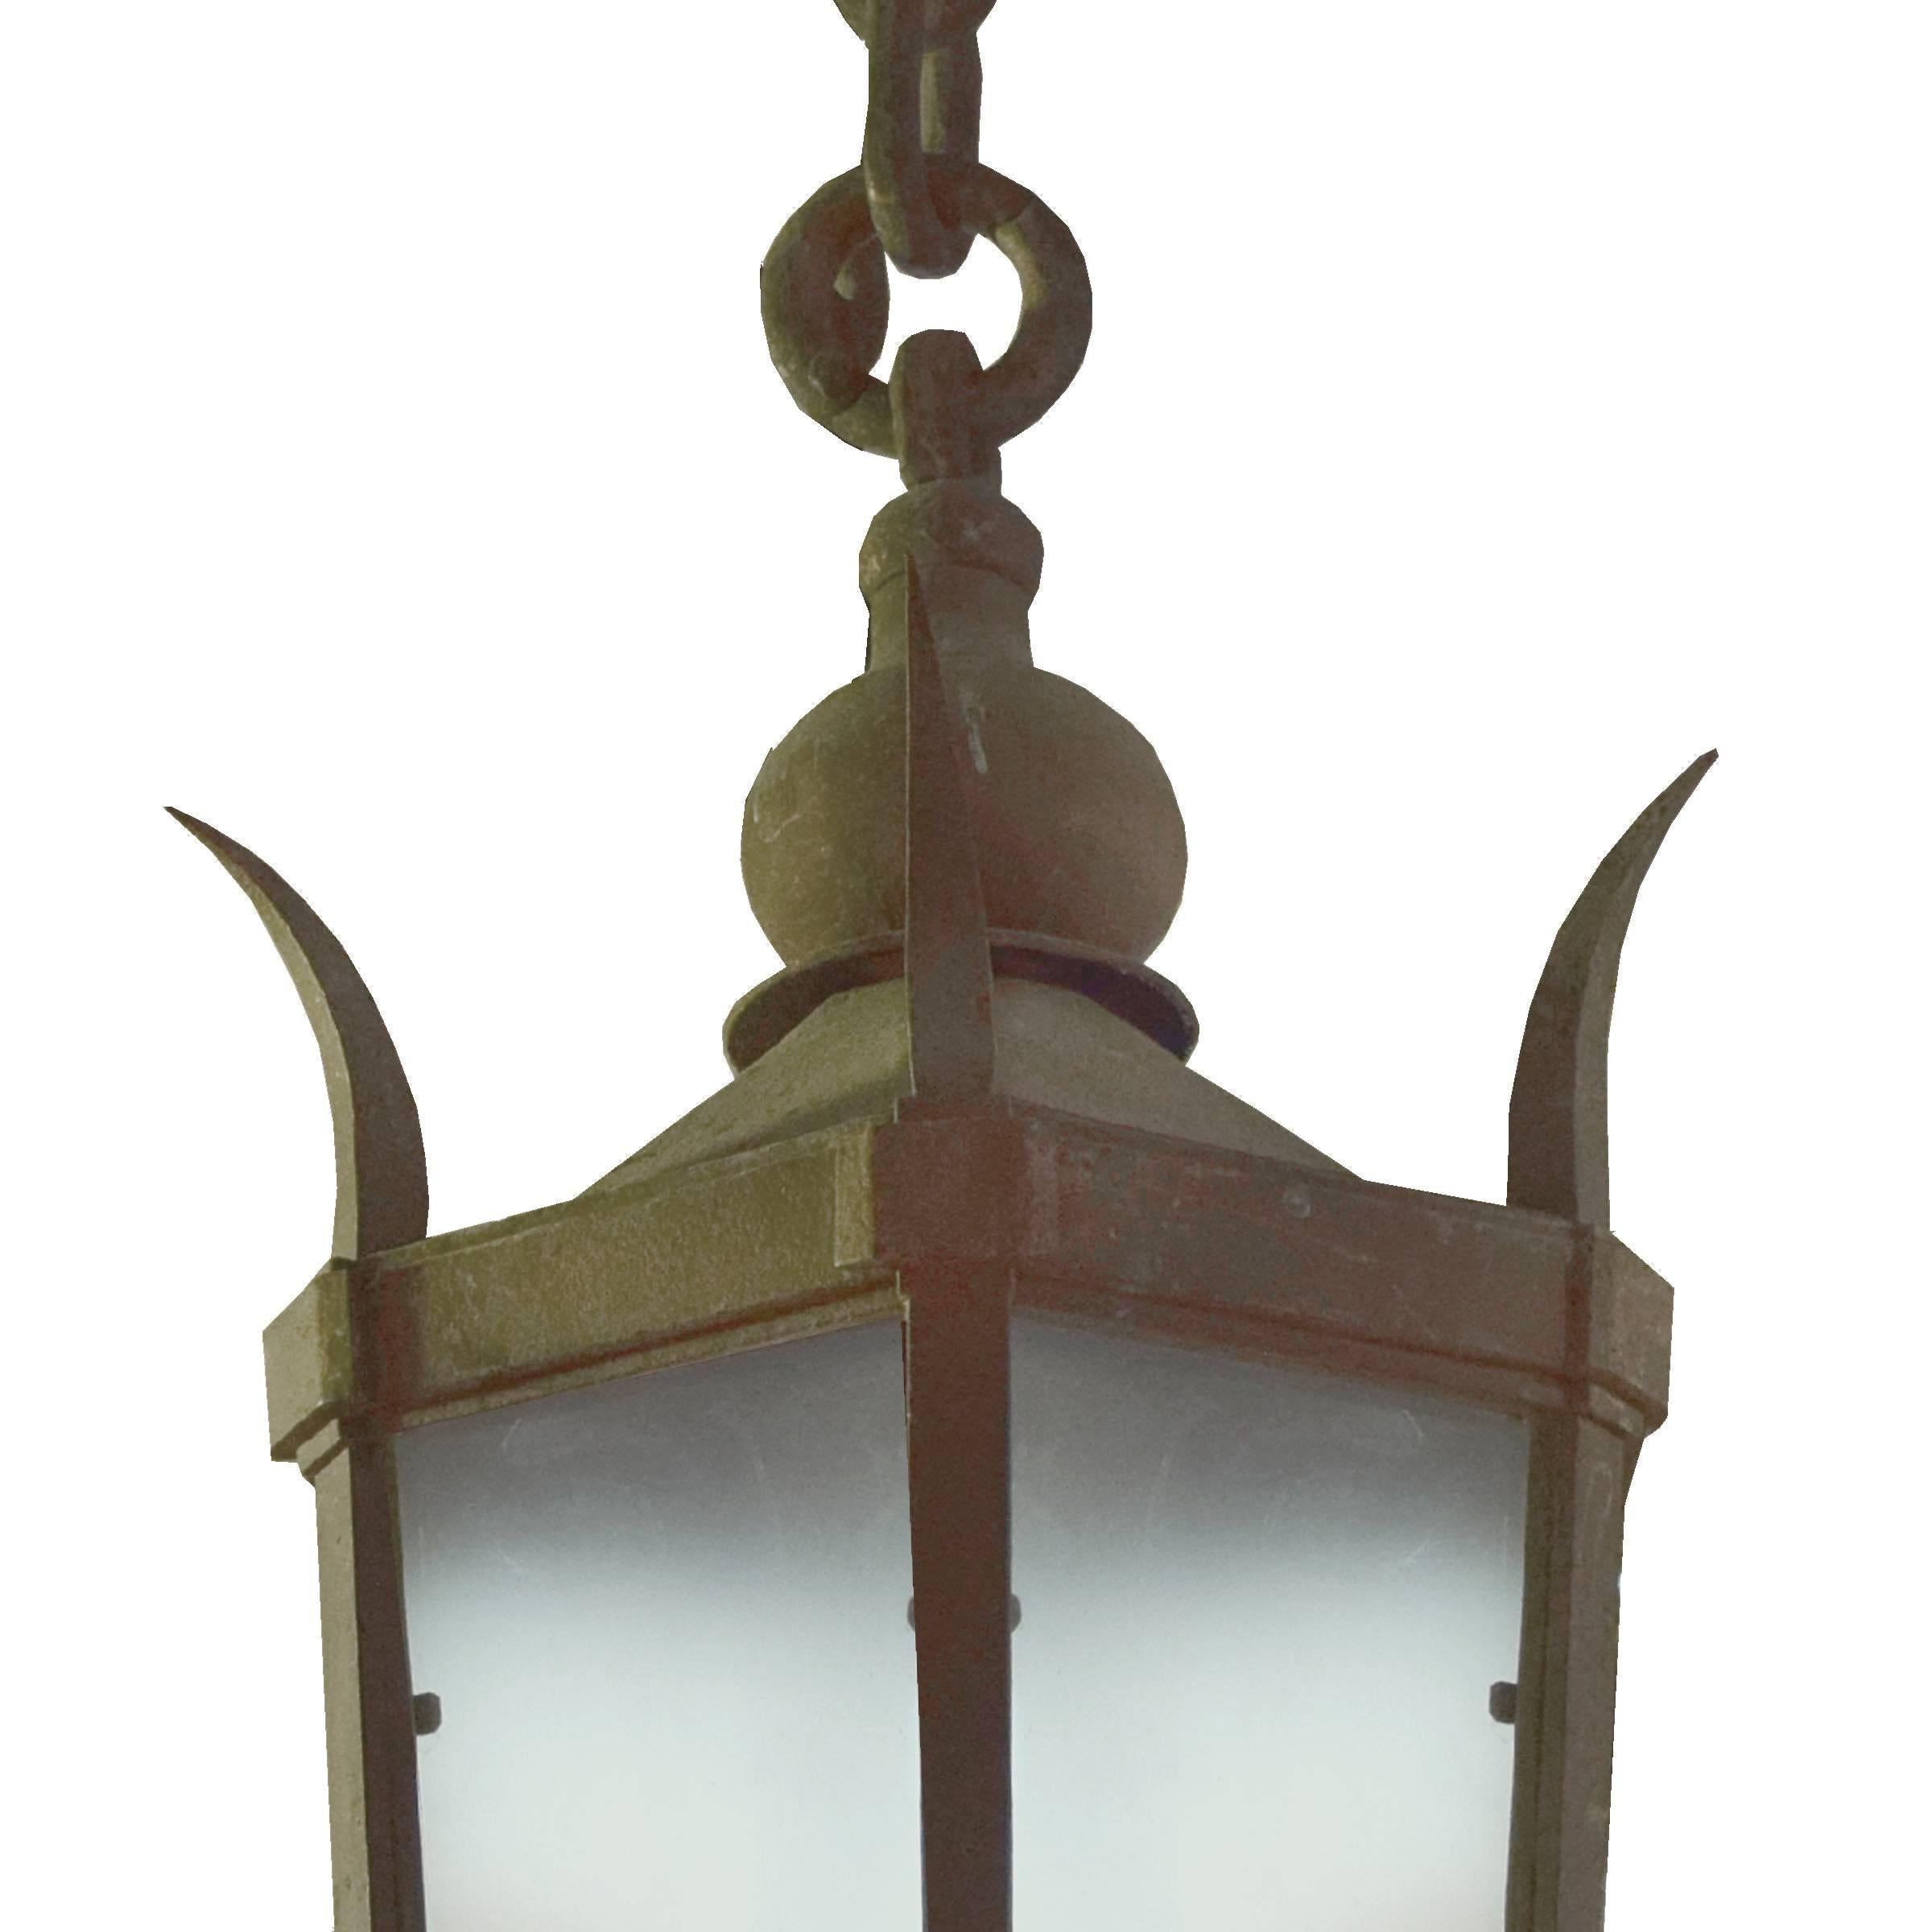 A wonderful Argentine wrought iron light fixture with six frosted glass shades from the estate of Jose Thenee, on a long heavy chain.
Requires re-wiring.